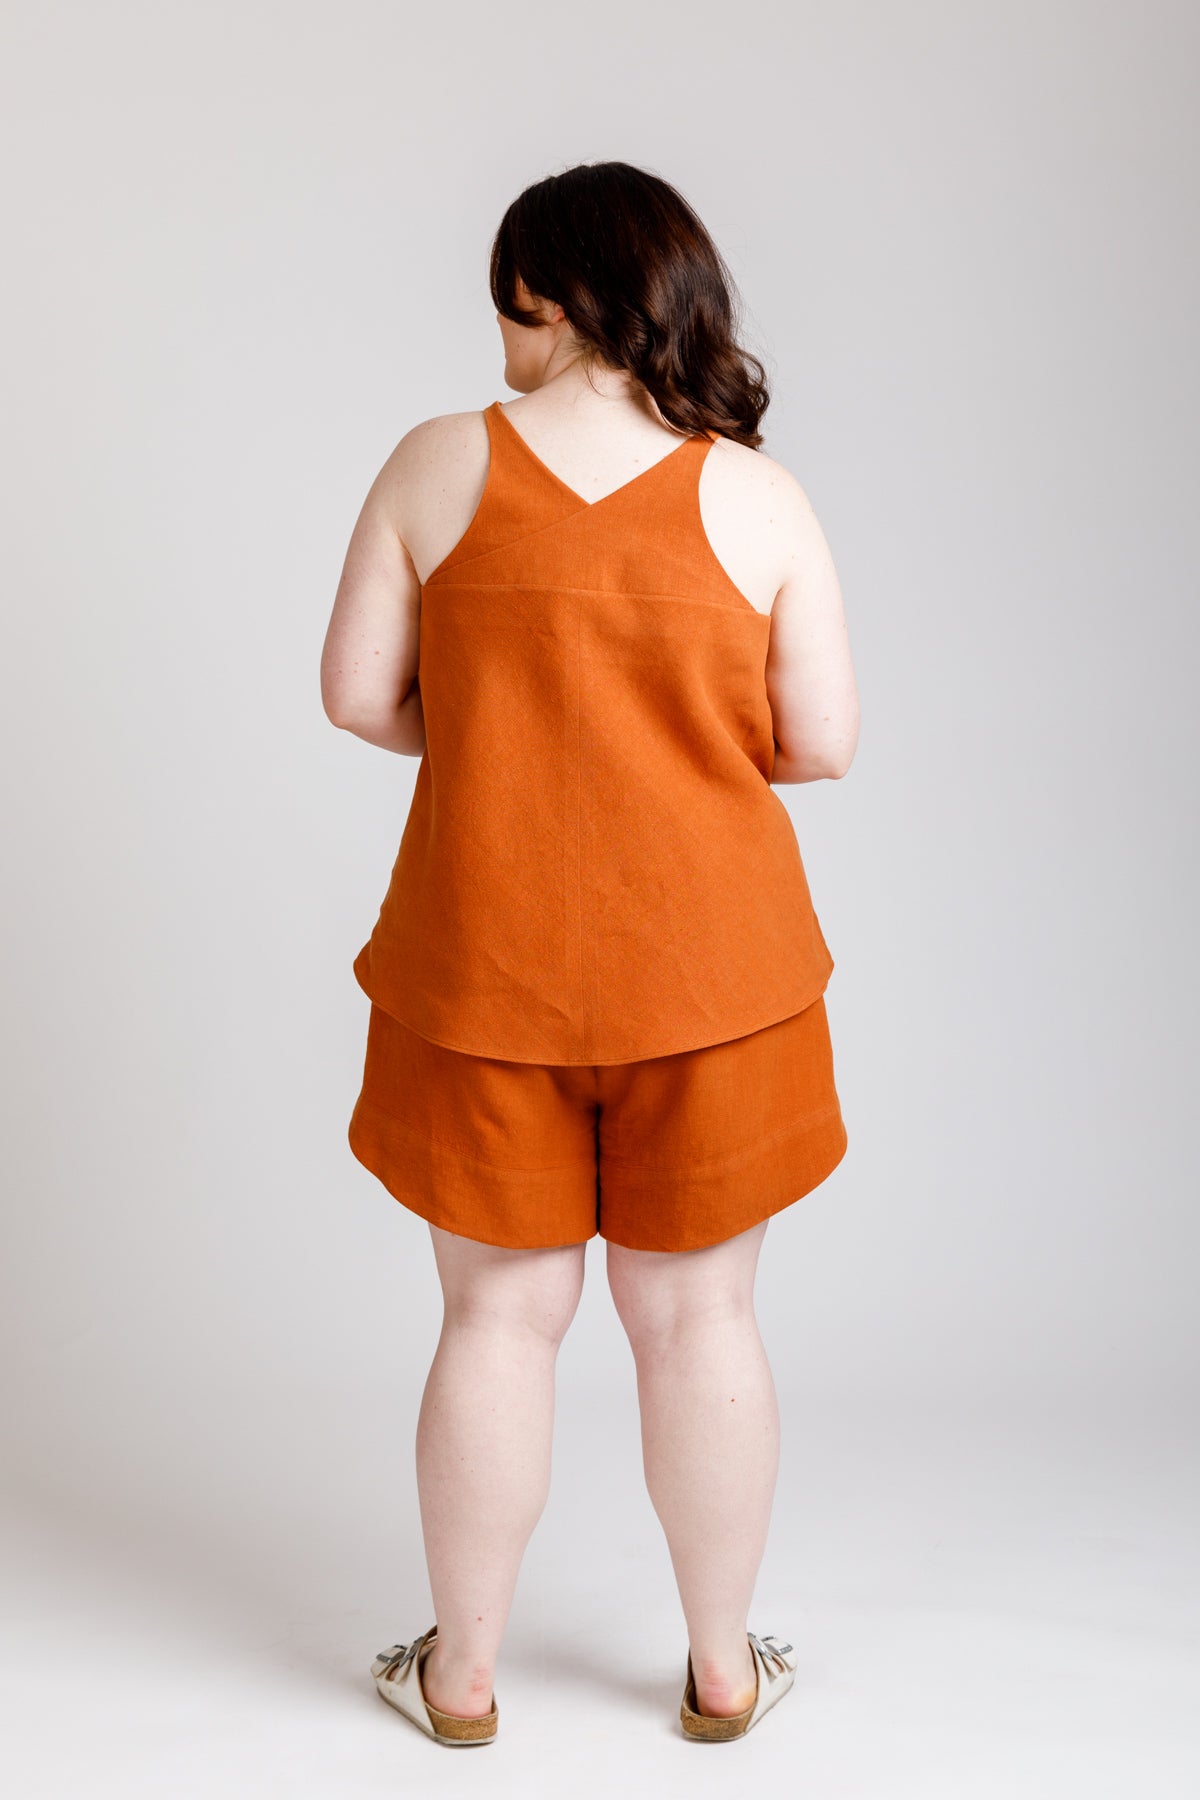 Reef Camisole & Shorts Set Sewing Pattern